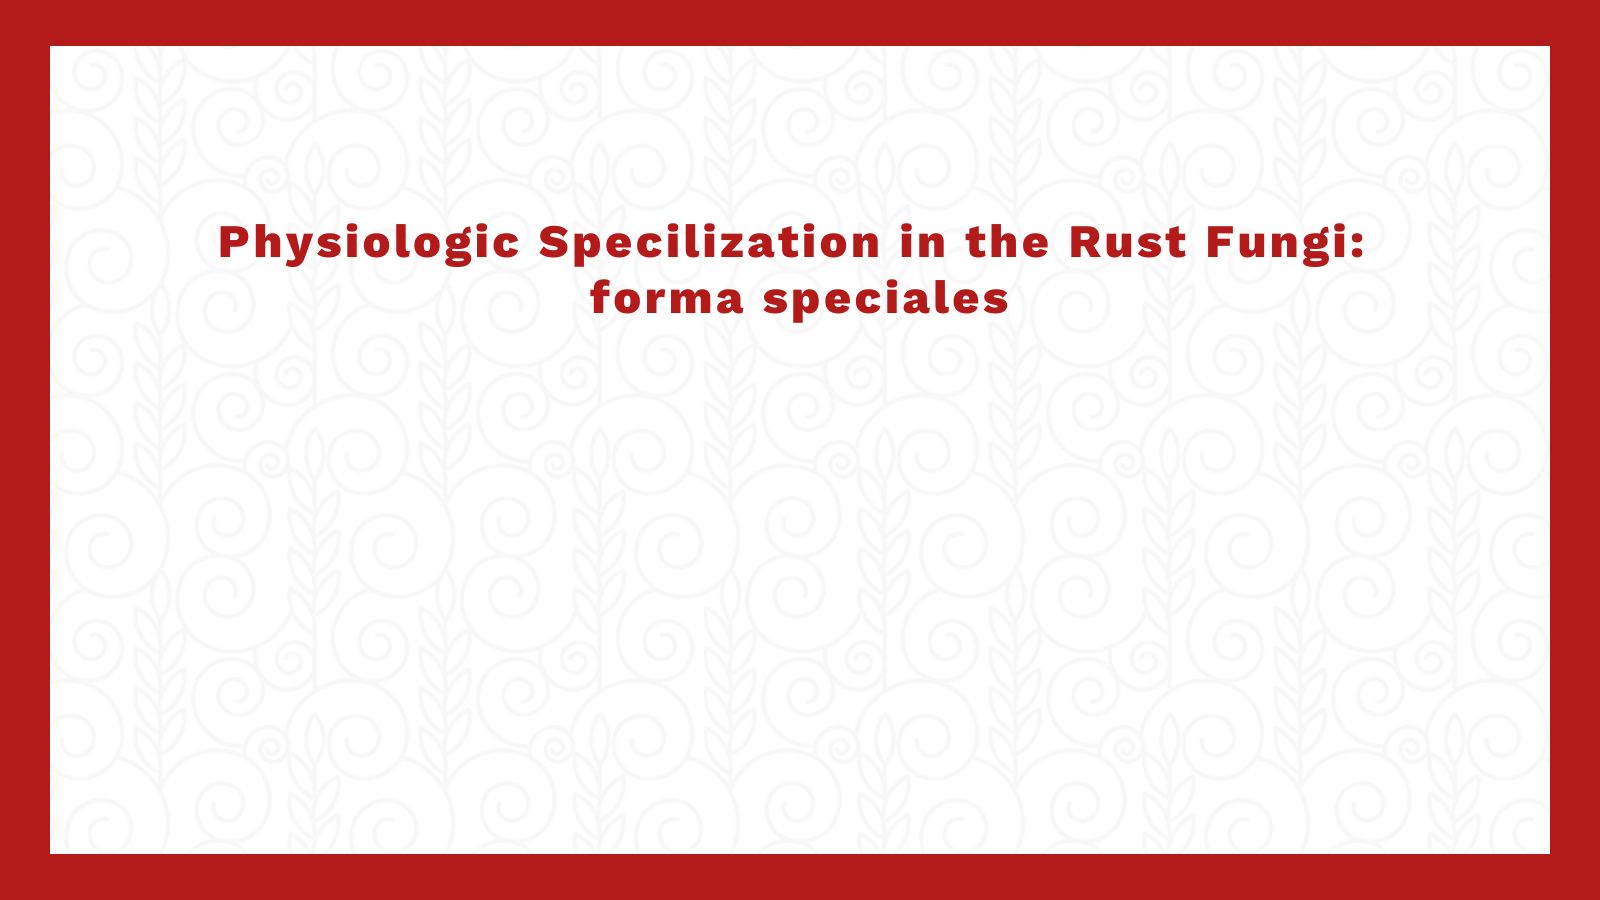 Physiologic Specilization in the Rust Fungi: forma speciales